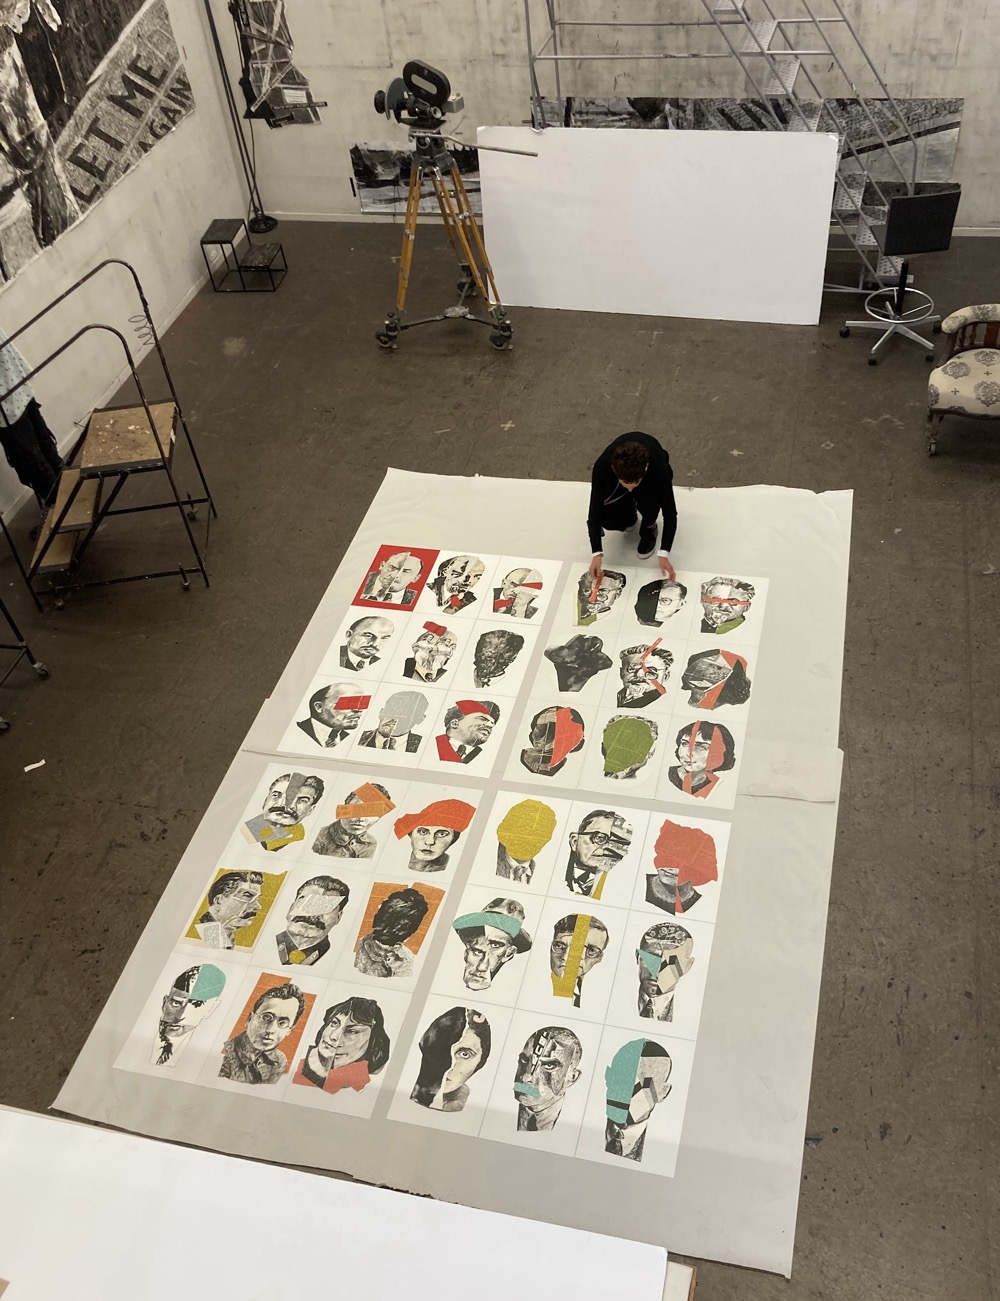 Elevated view looking down at 36 Soviet portraits by William Kentridge in his Johannesburg studio